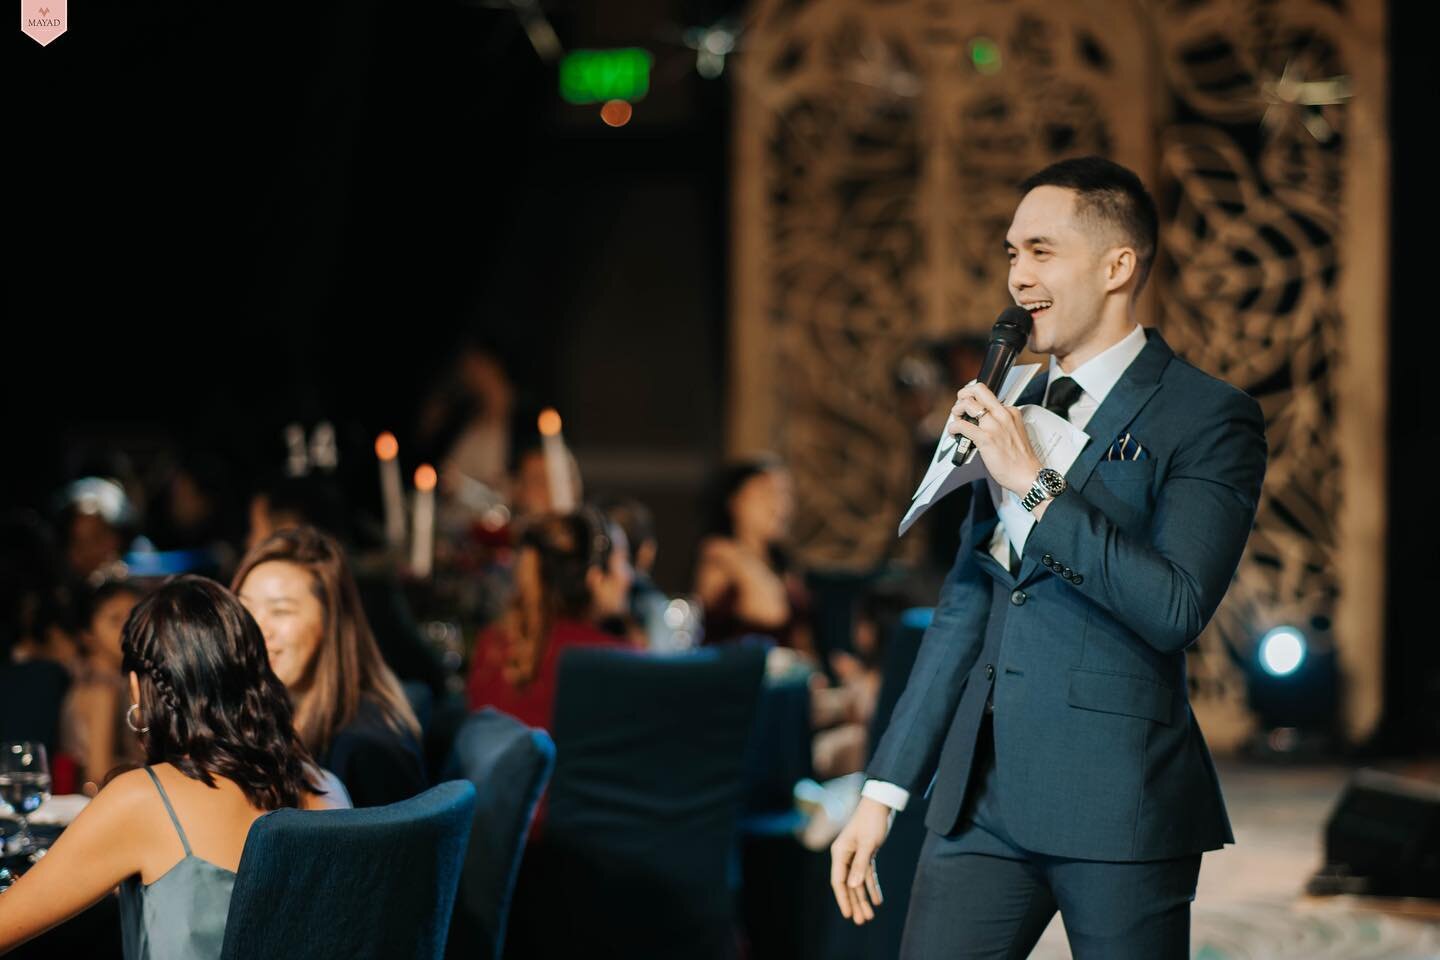 It&rsquo;s easy to grab everyone&rsquo;s attention when you&rsquo;re on a stage and you have bright lights on your face. But what if you&rsquo;re hosting an intimate wedding reception with only 10 guests? Somehow, you&rsquo;re supposed to keep everyo